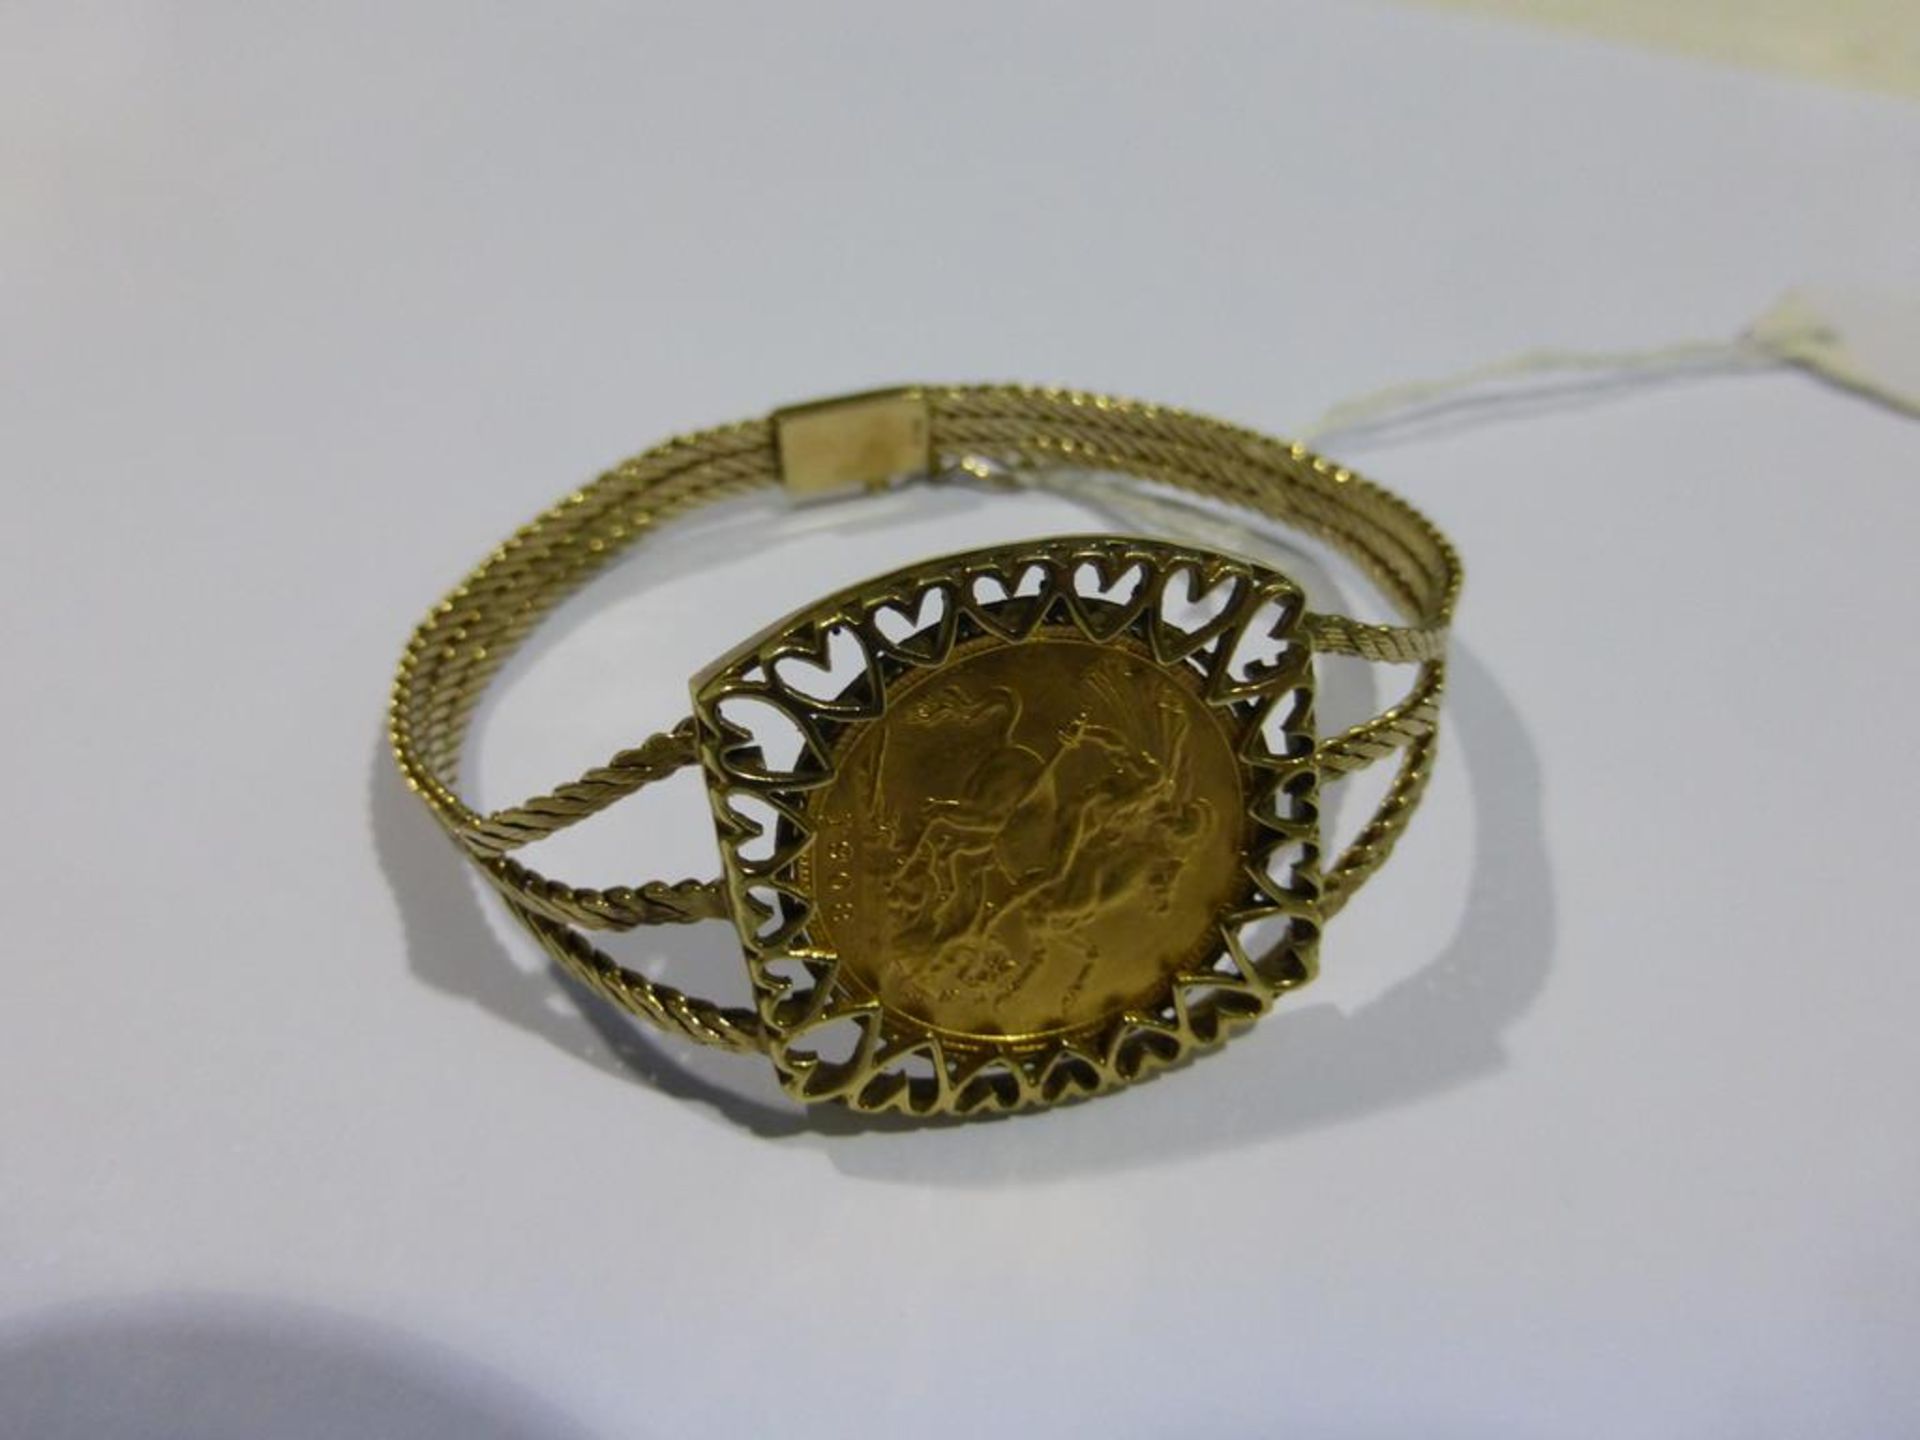 A 1908 Sovereign Mounted to a 9ct Gold Bracelet - Image 4 of 4